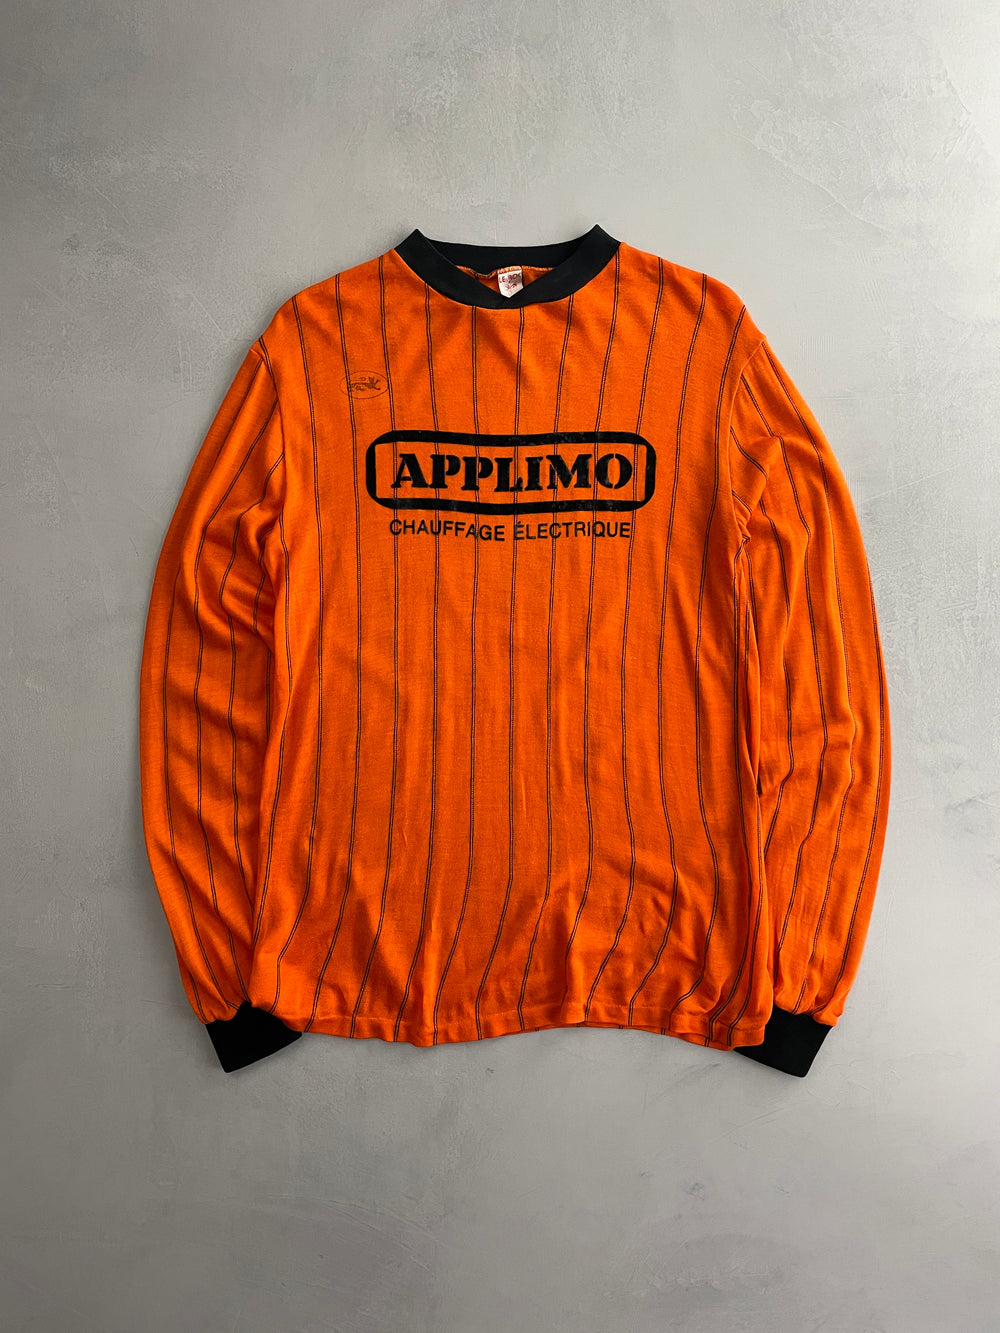 70's French Applimo Jersey [M/L]